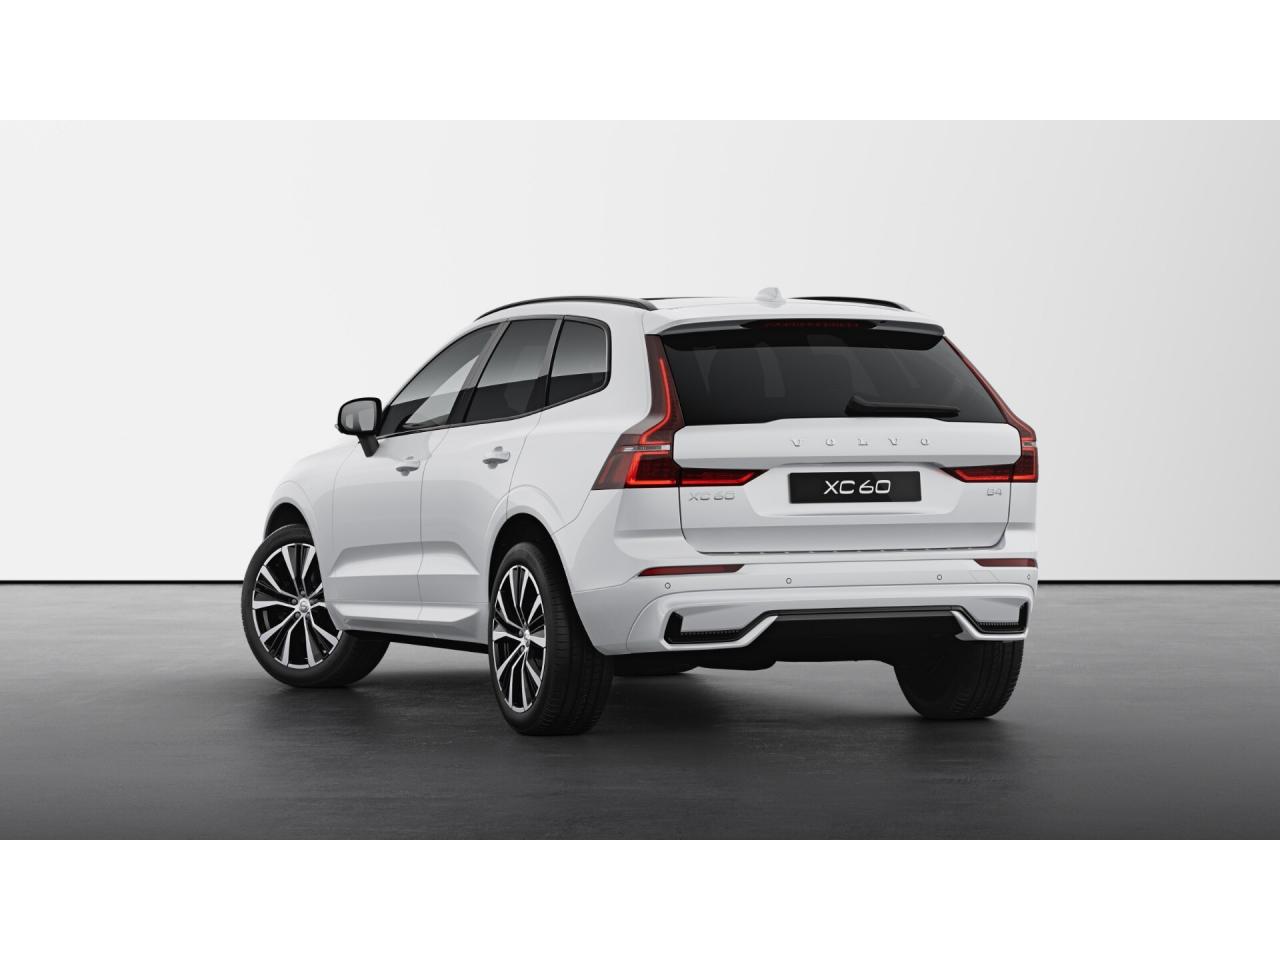 VOLVO XC60 B4 FWD MICRO-HYBRIDE DIESEL 197CV GEARTRONIC ULTIMATE STYLE DARK + PACK PROTECTION + ALARME